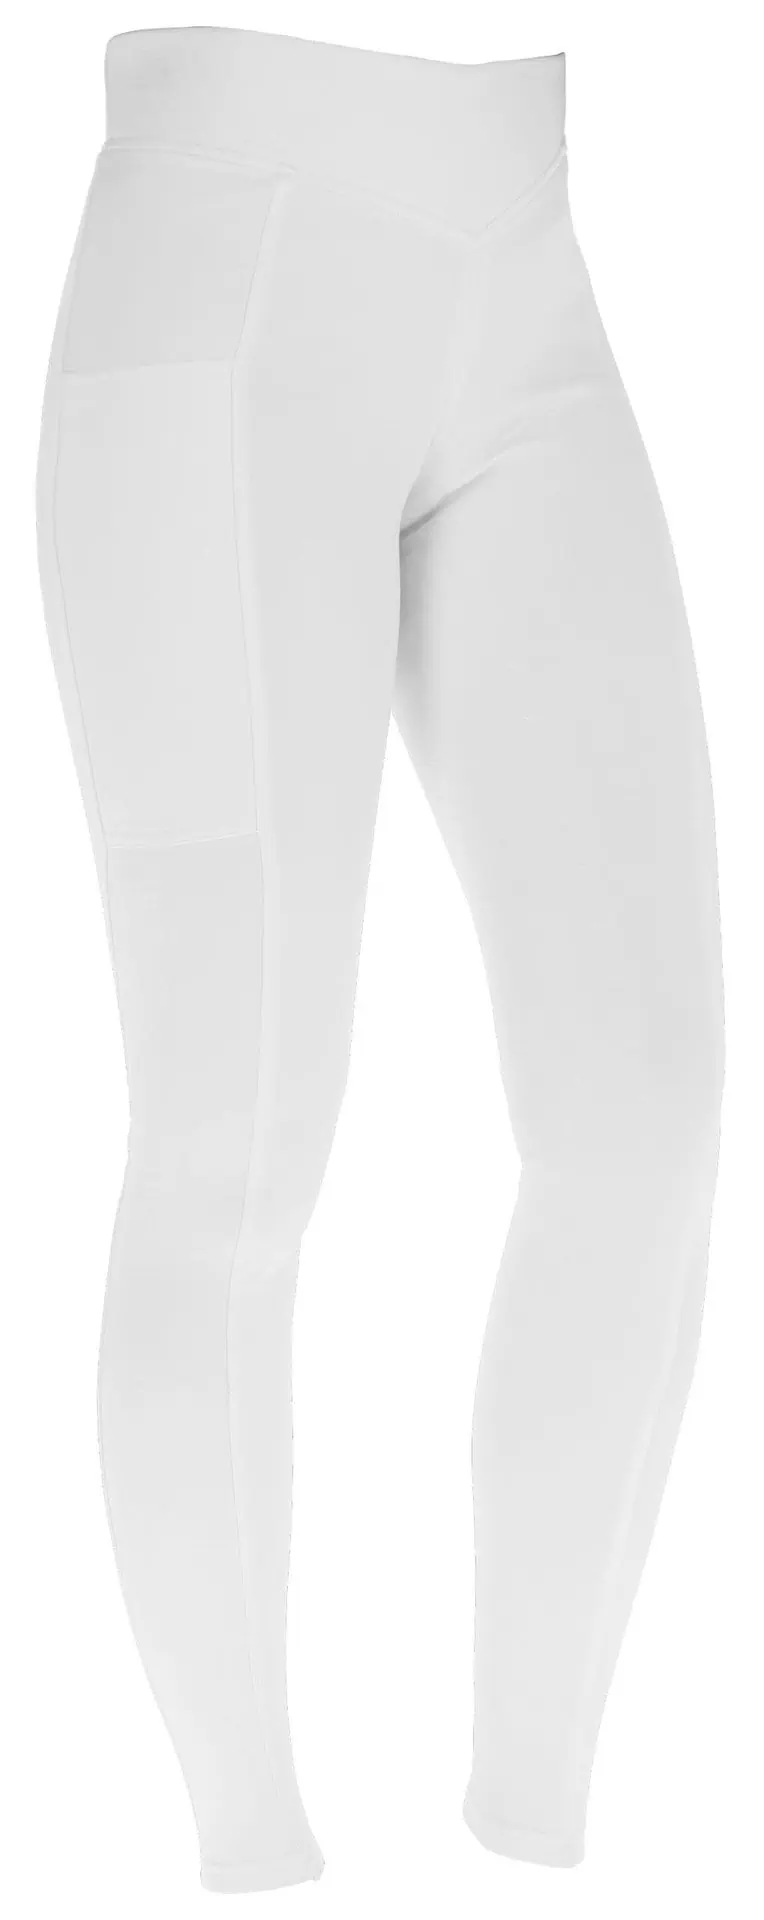 Riding Tights ClassicStar Ladies white, size 32/34